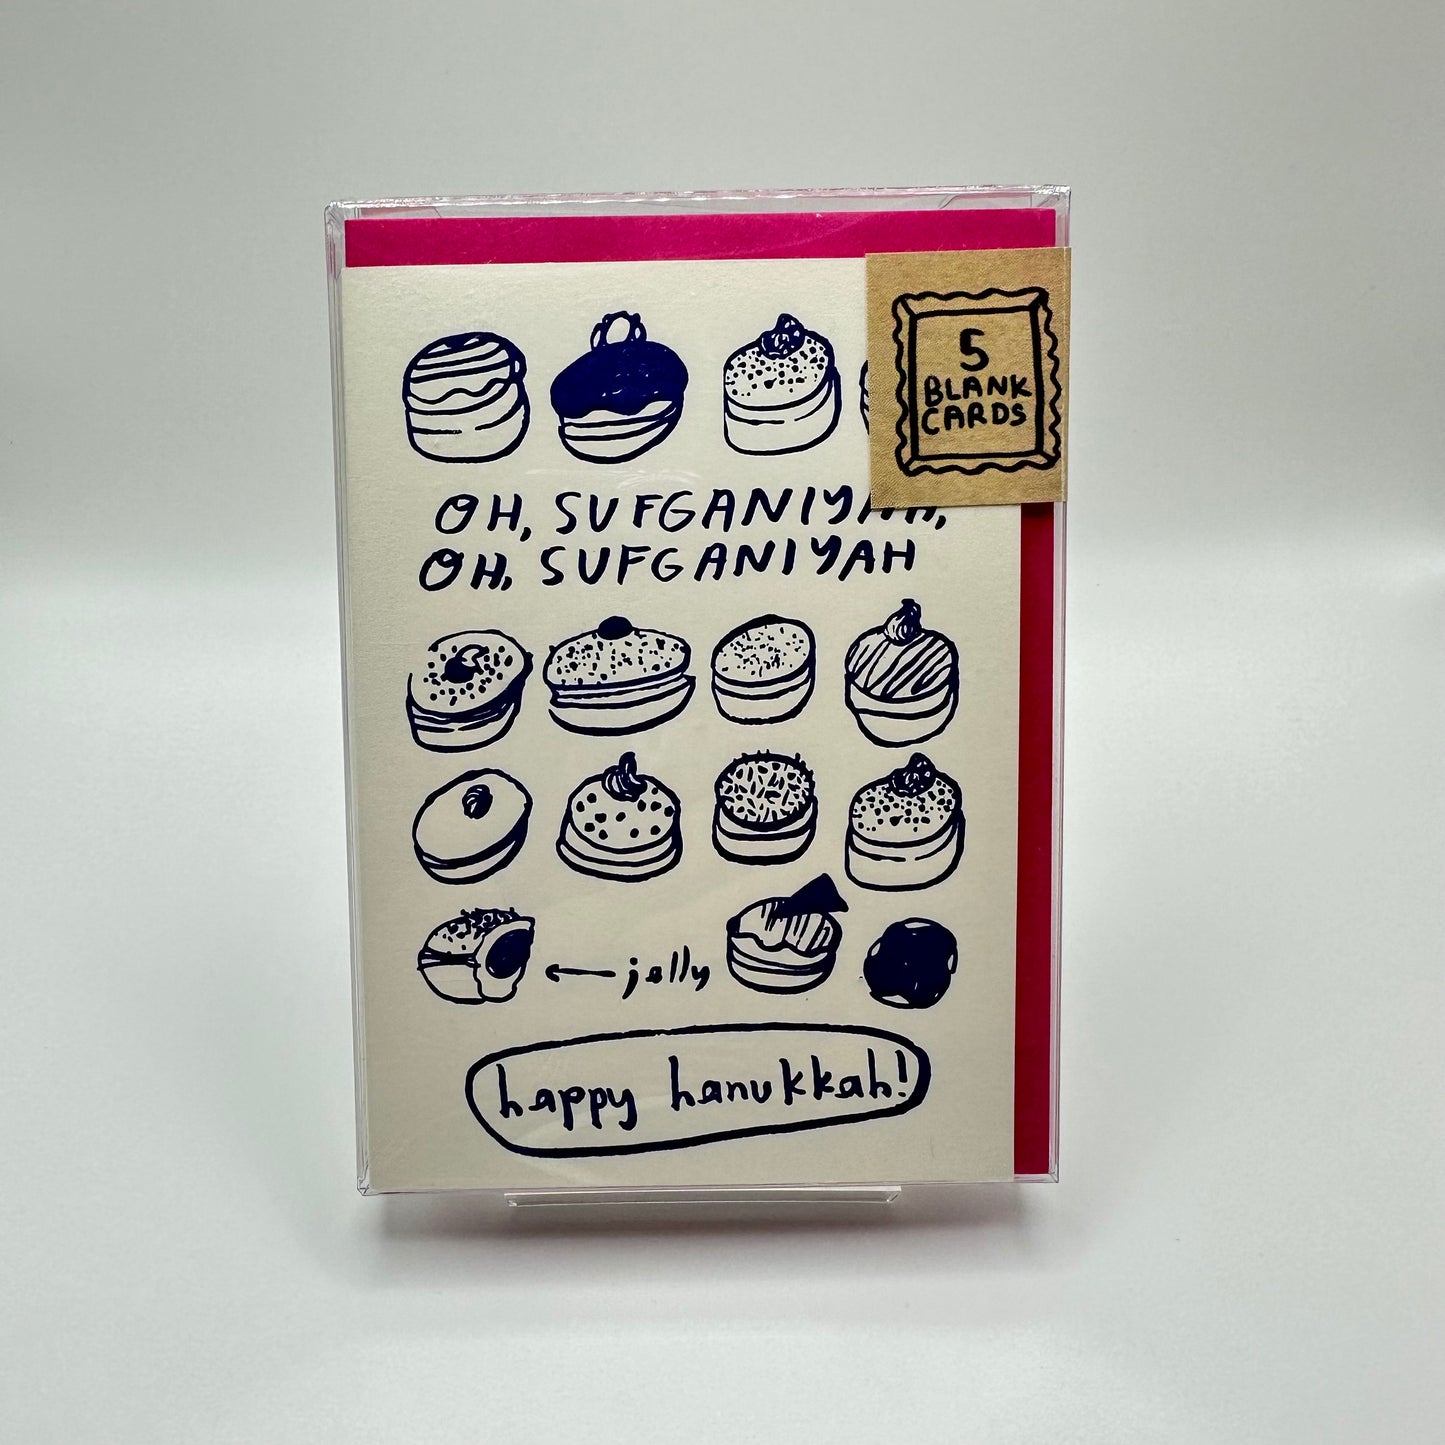 Hanukkah card filled with assorted jelly donuts. Card reads" Oh Sufganiyah, oh Sufganiyah. Cards are in a clear plastic box with a little label that says: 5 Blank Cards.